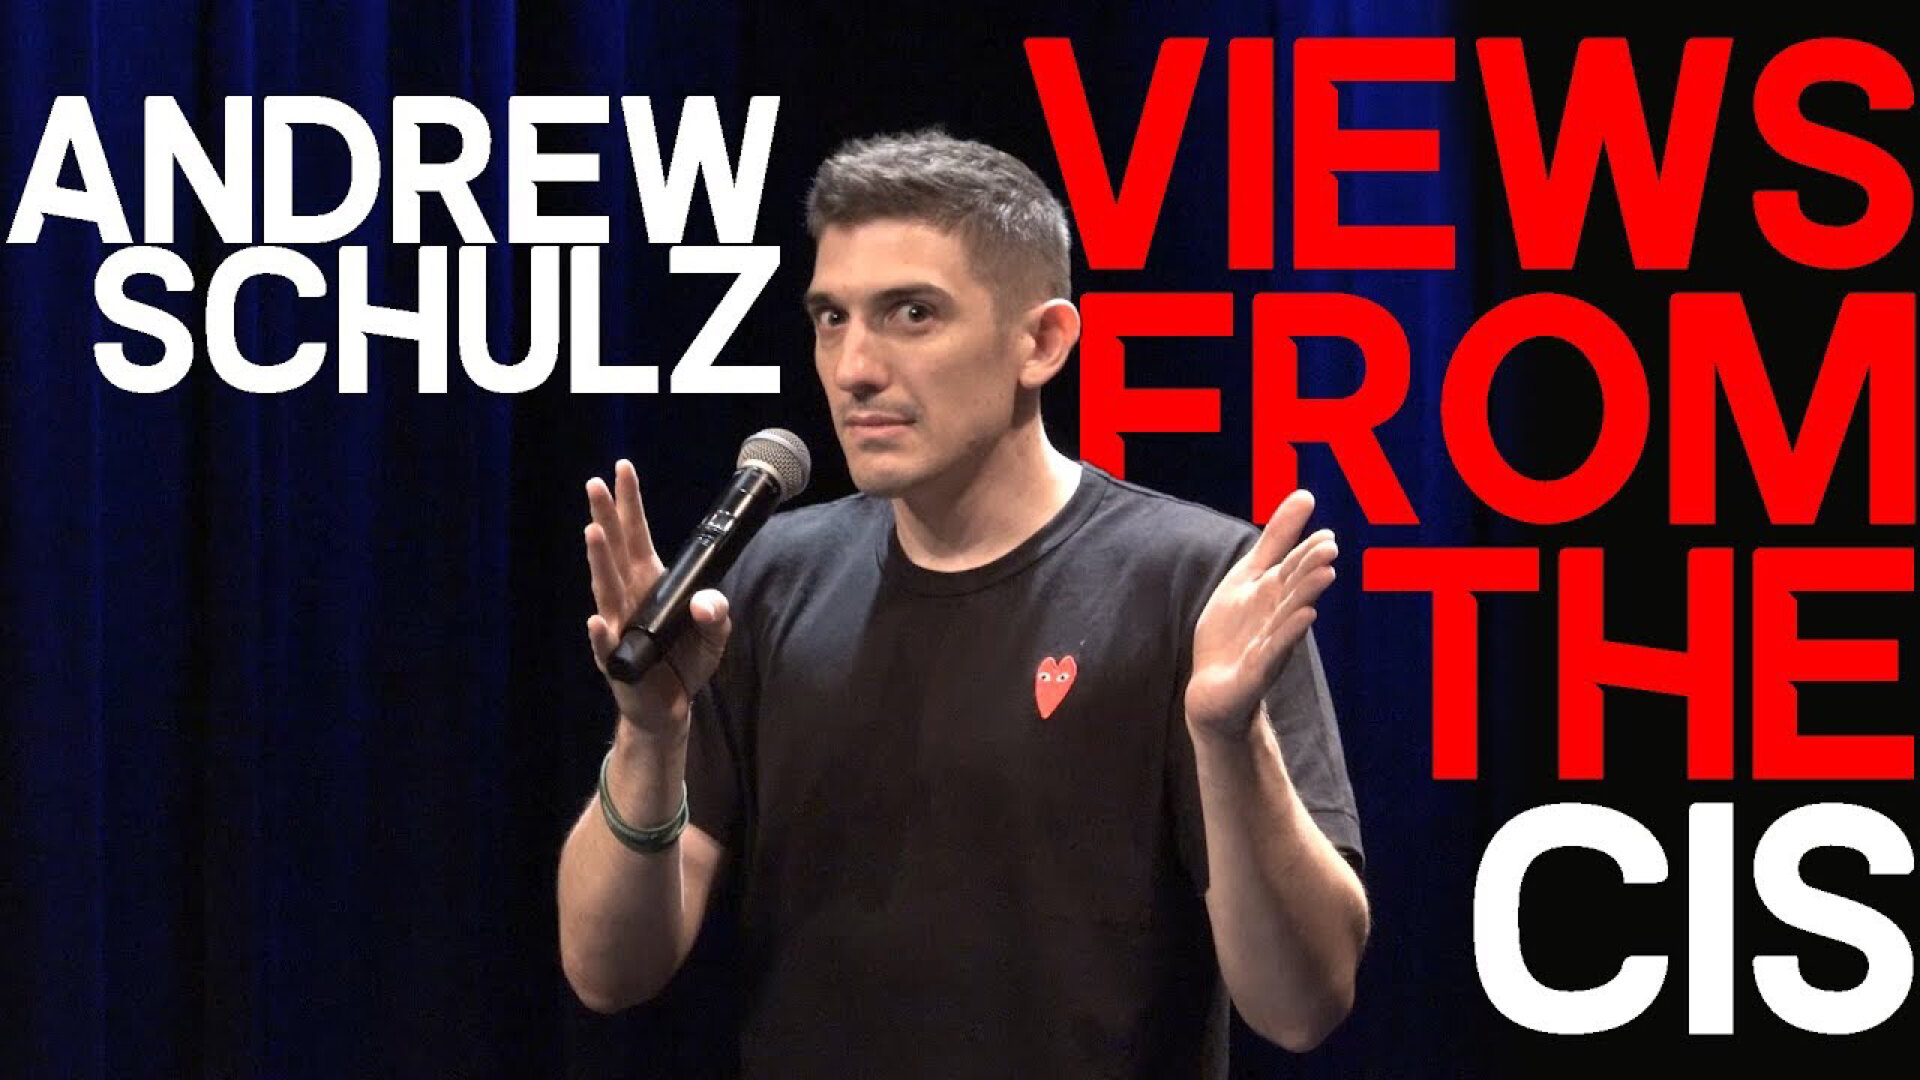 Andrew Schulz: Views From The Cis comments (TV Series 2019) .